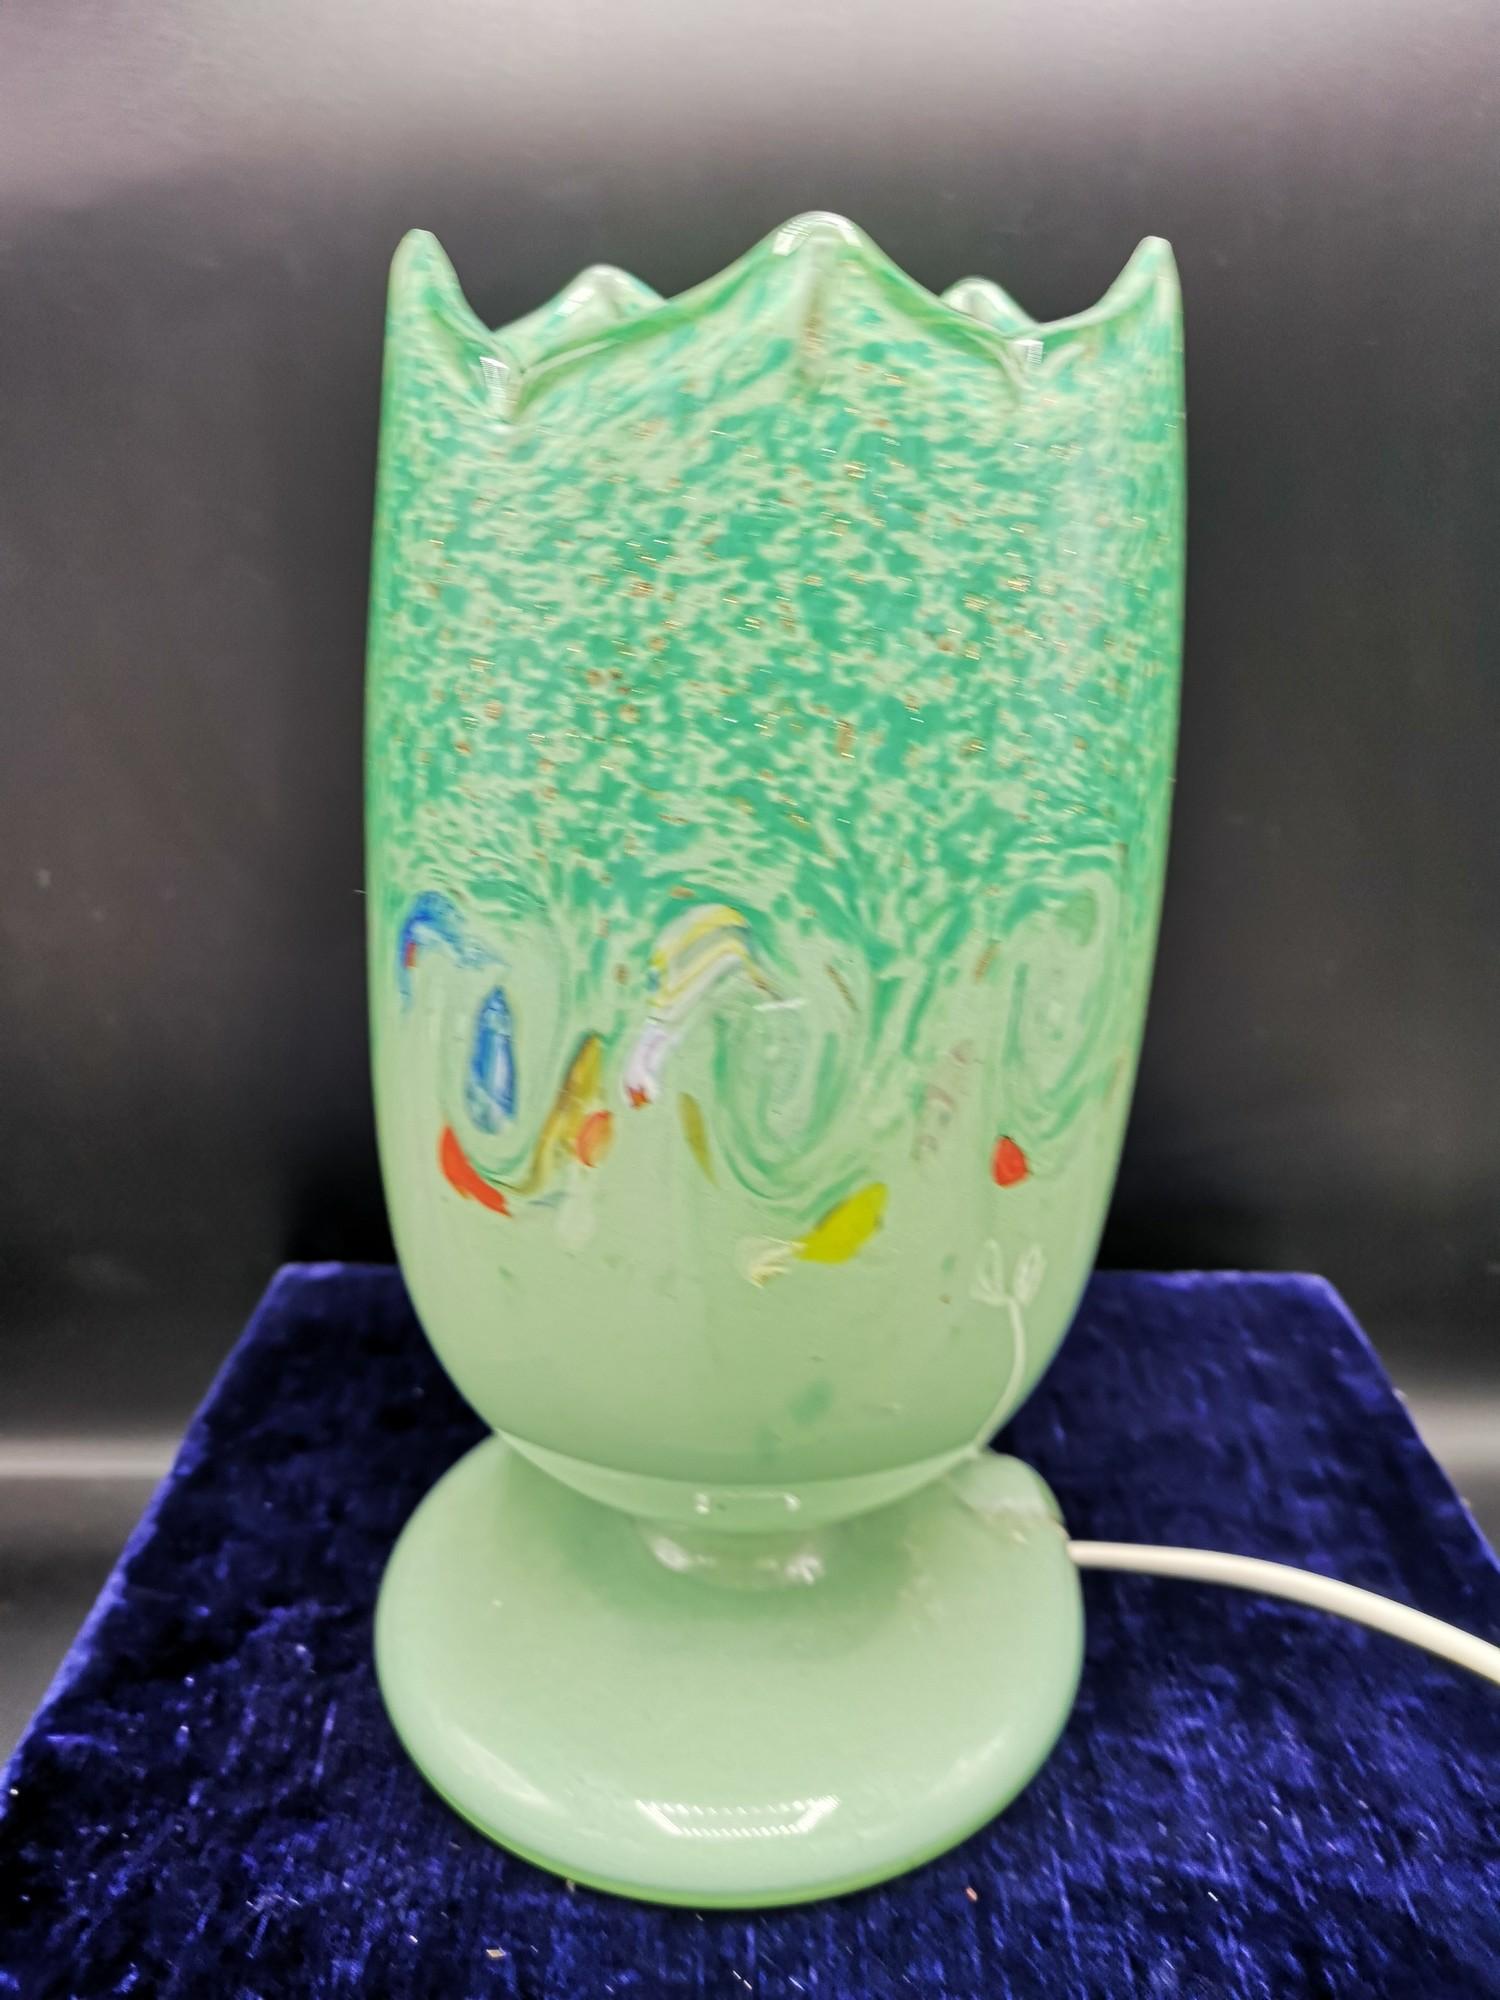 Monart scottish glass table lamp with green colouration and mulit swirl colourations. - Image 4 of 5